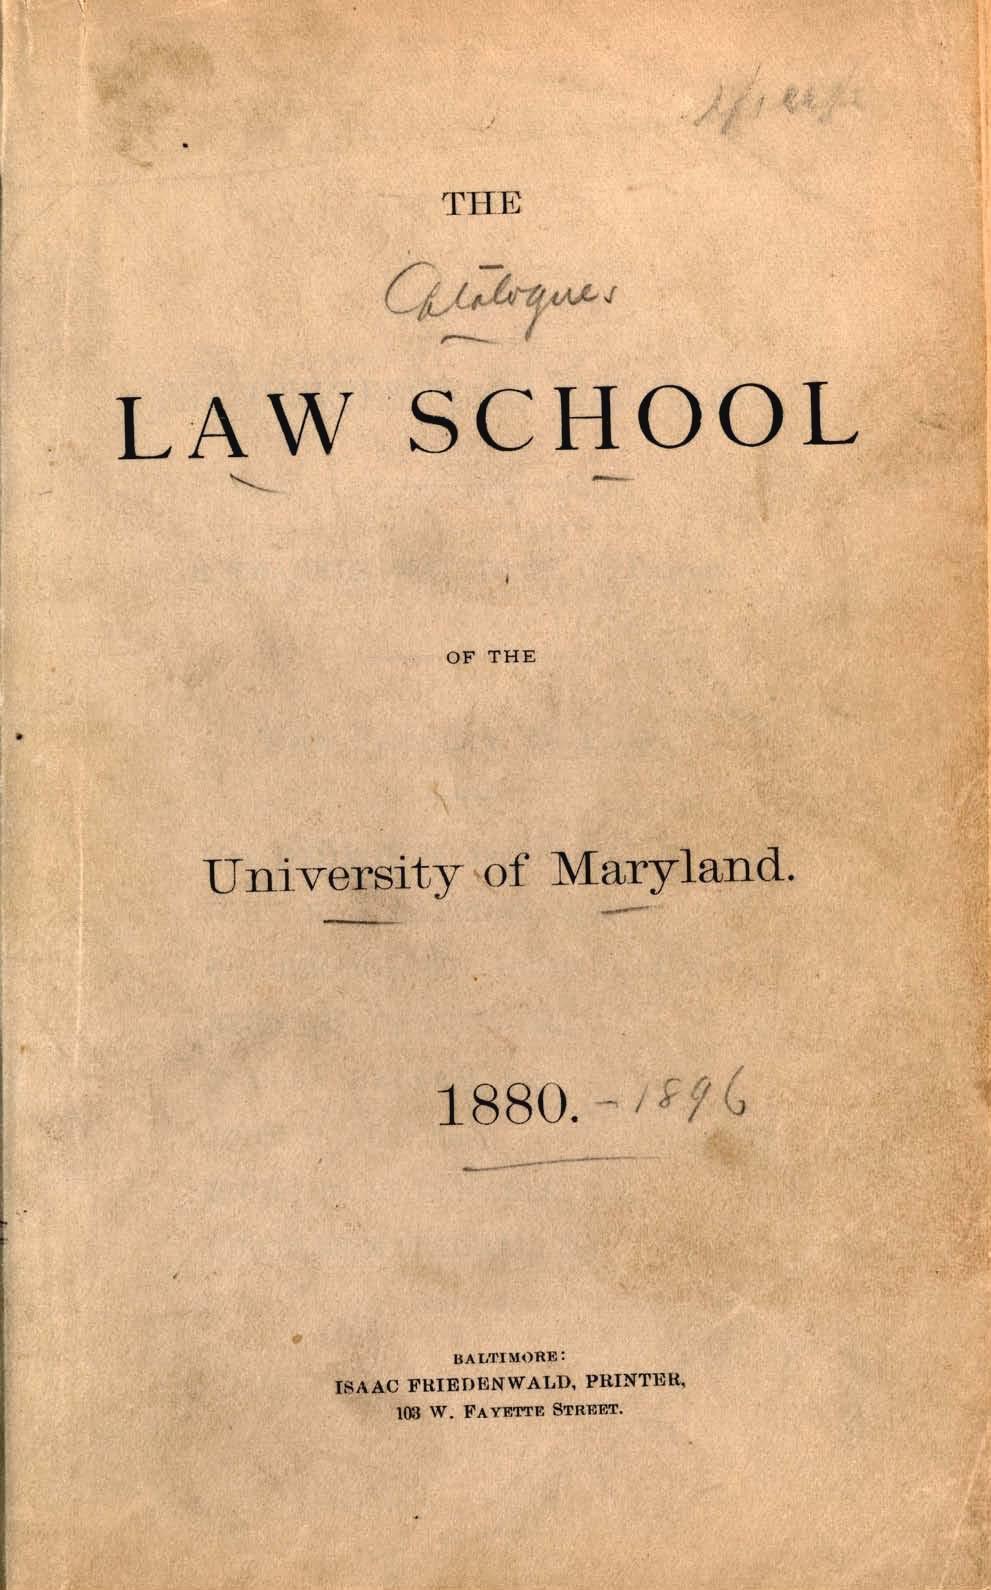 THE LAW SCHOOL OF THE University of Maryland, 1880.